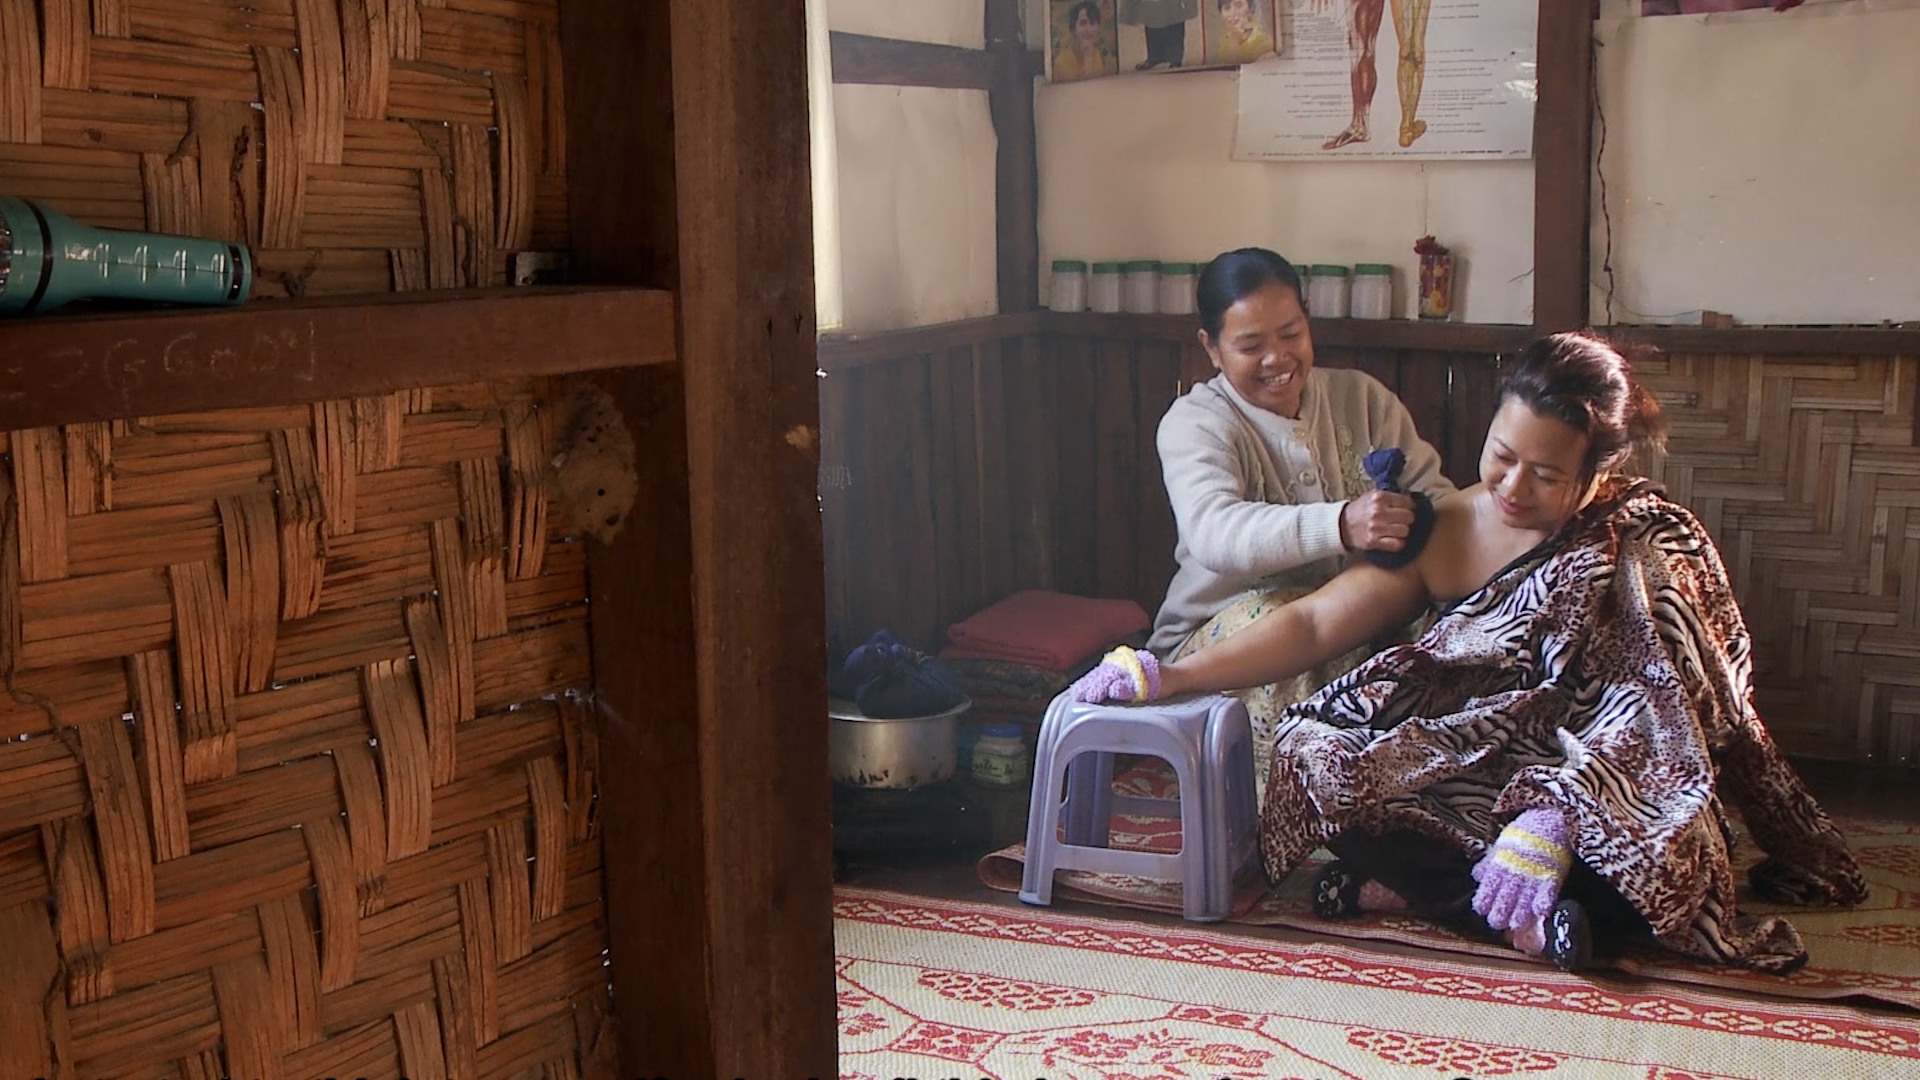 Nyunt Kyi treating a woman in her clinic